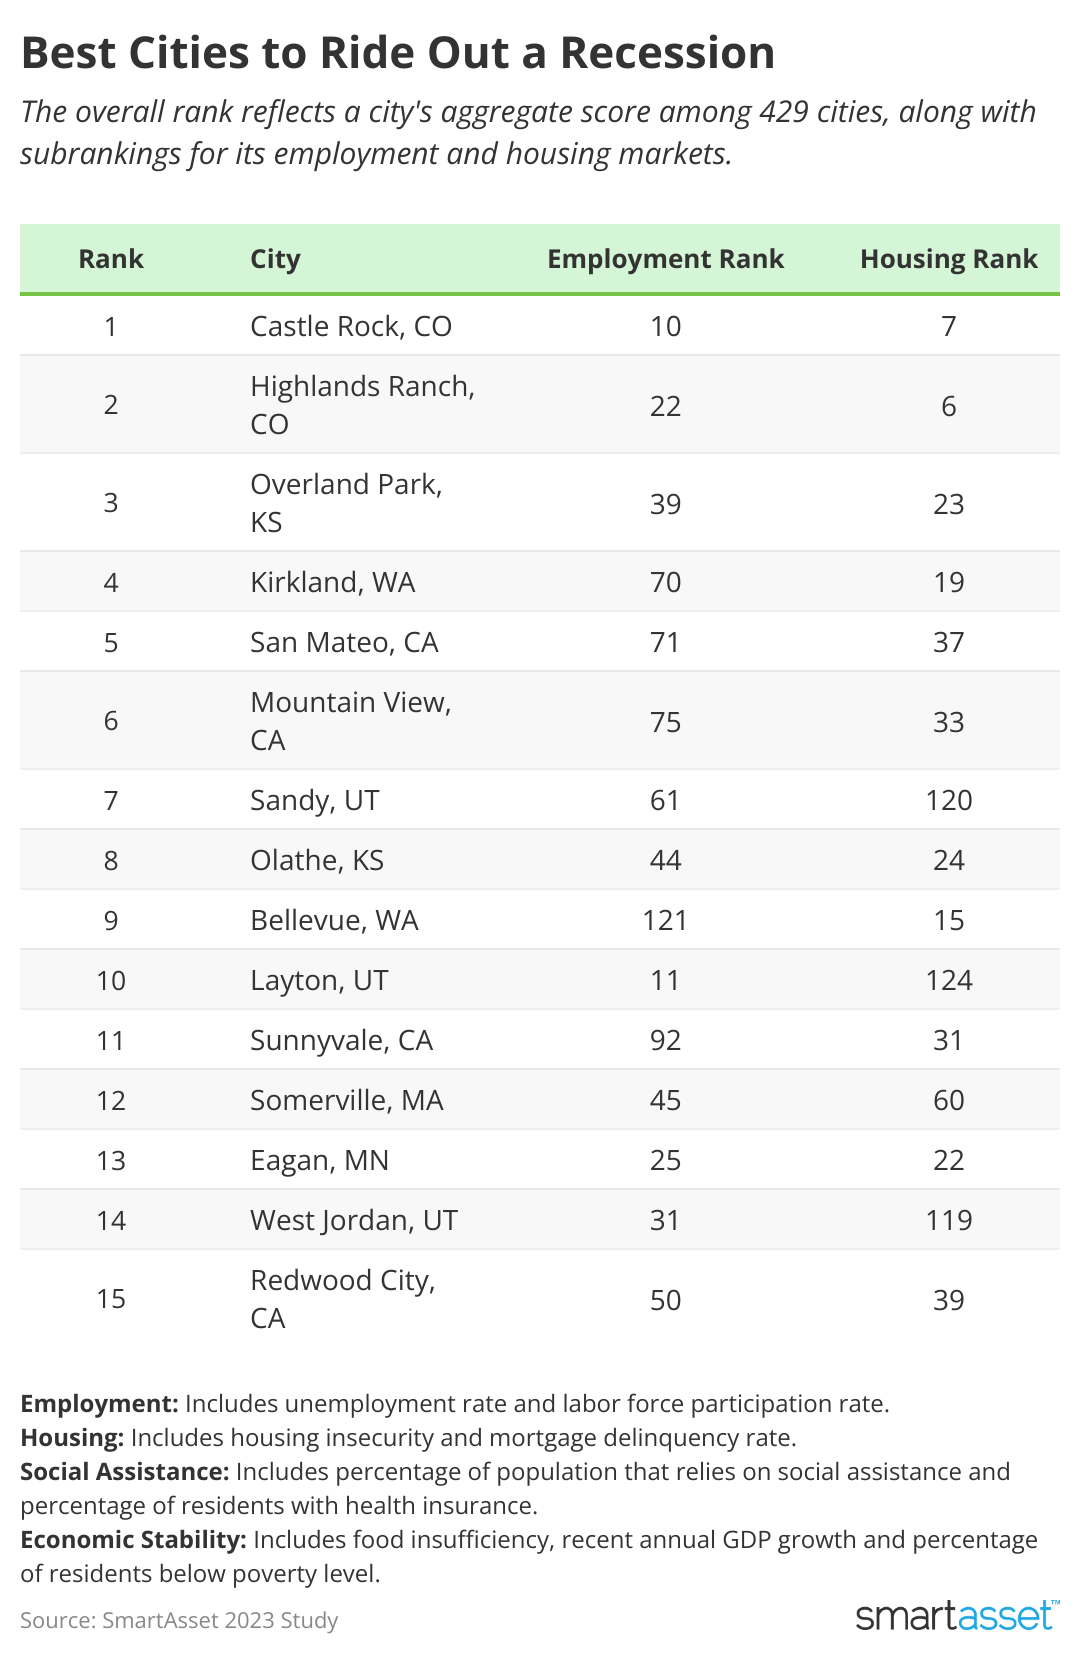 A chart listing the 15 best cities to ride out a recession.